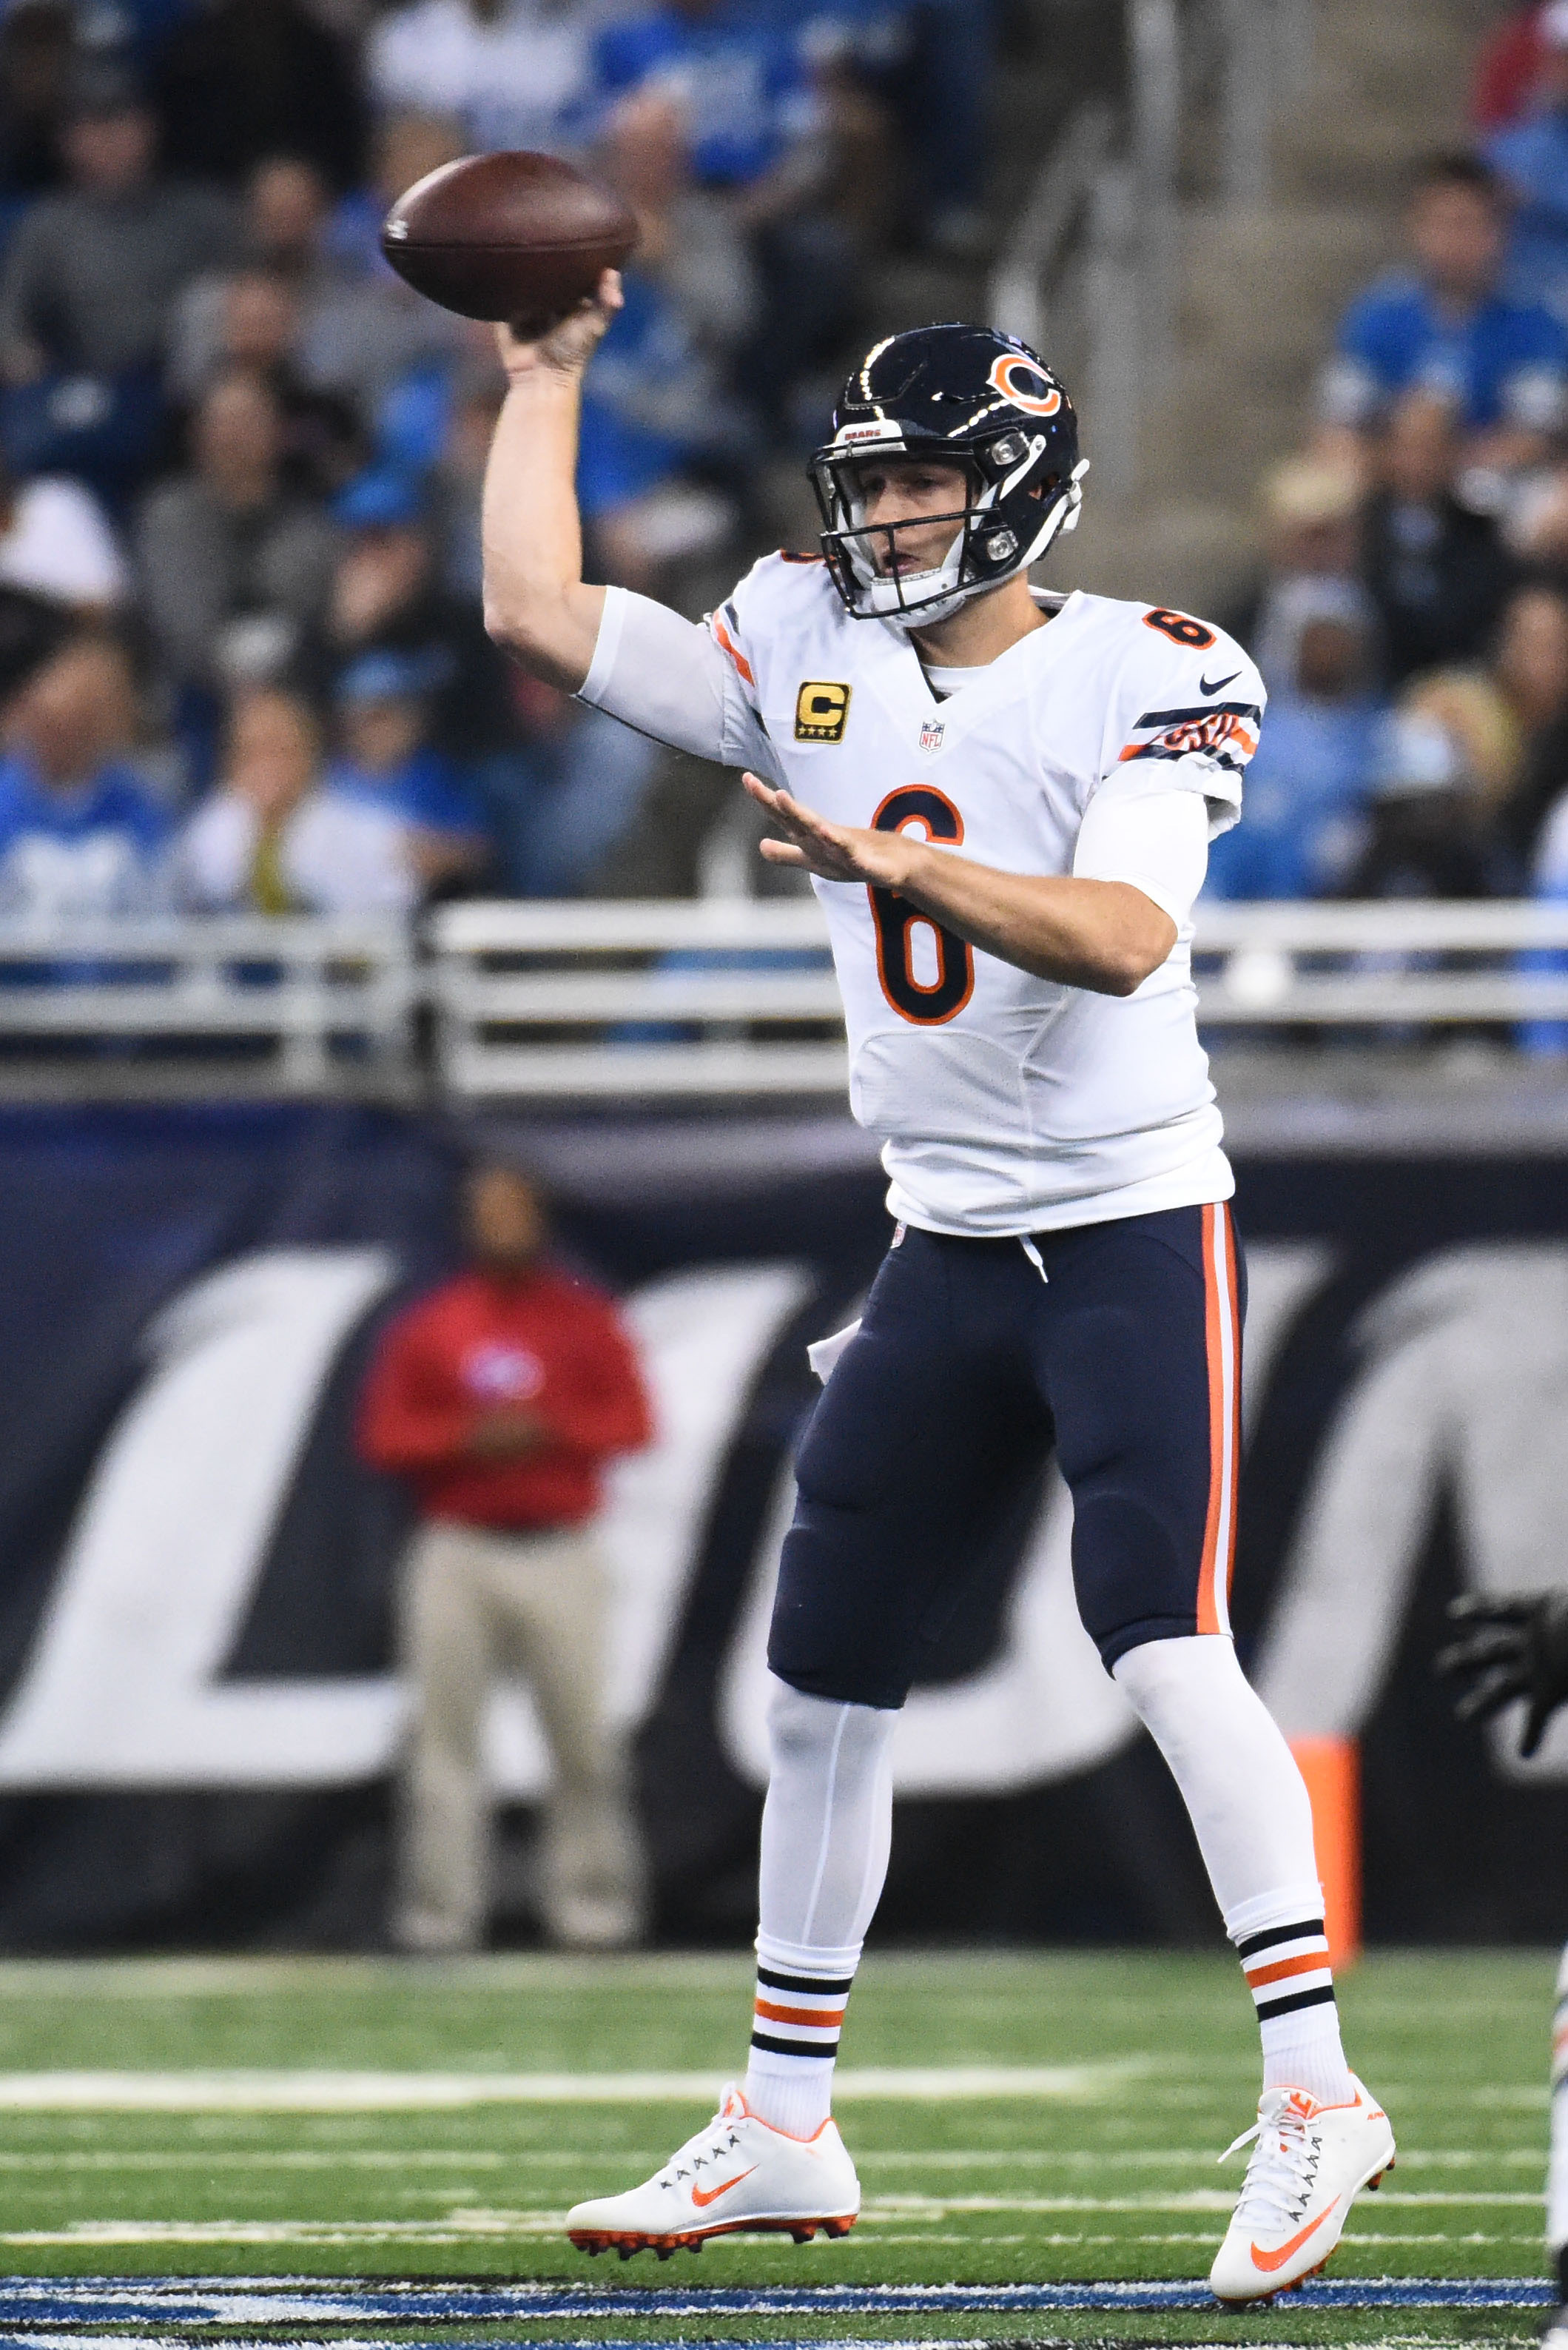 Can the Bears win when Jay Cutler throws for 300 yards?